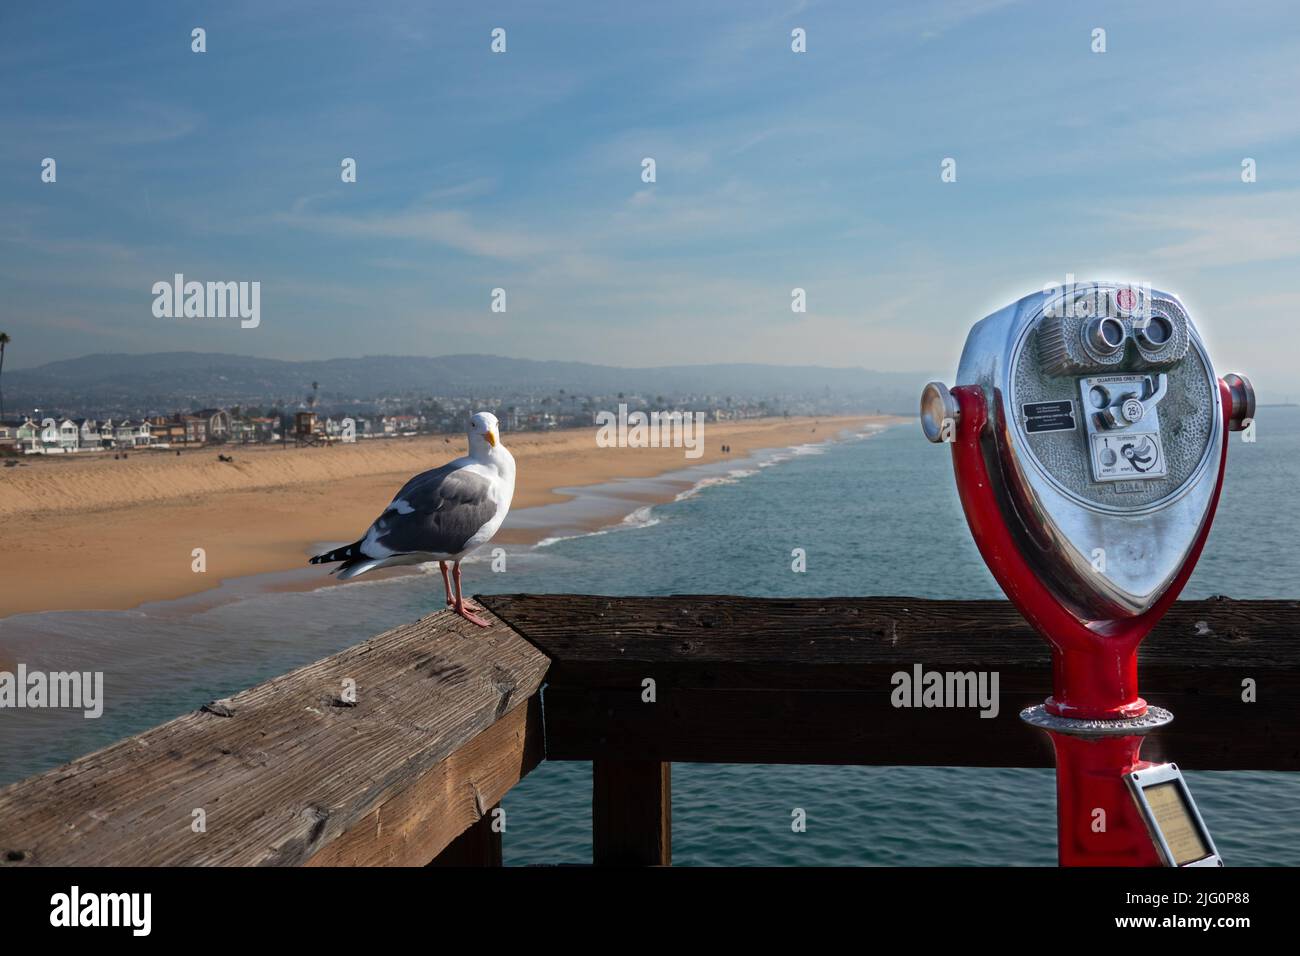 Coin operated binoculars and close up of seagull on pier looking over the long sandy beaches on the Balboa peninsula Newport Beach Southern Californii Stock Photo